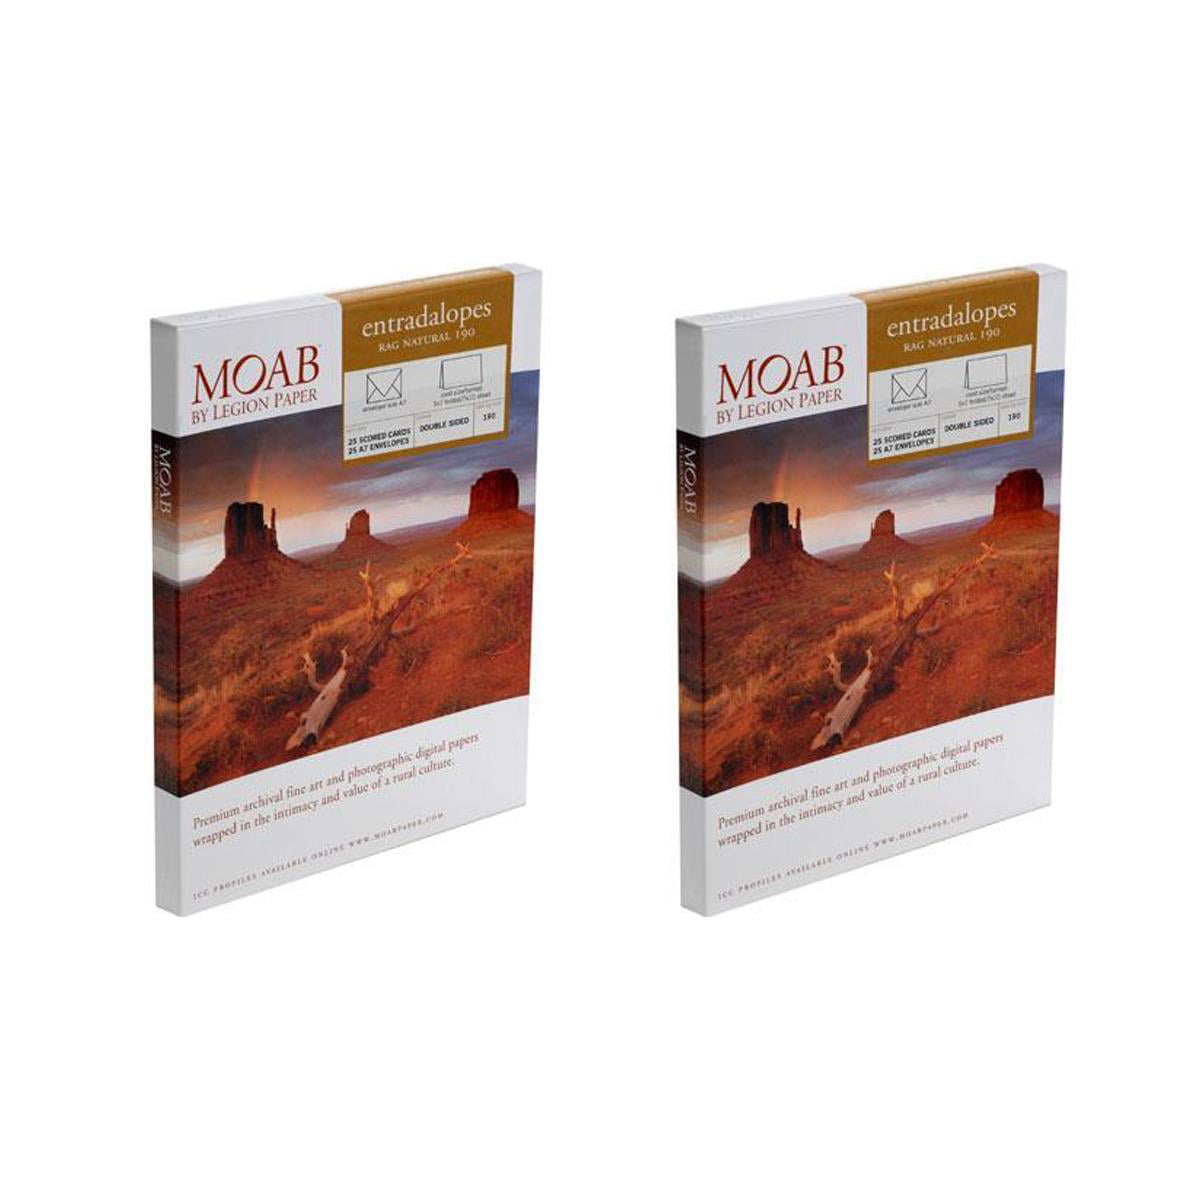 7x10 235gsm Double Sided Moab Lasal Photo Matte Bright White Archival Scored Inkjet Paper Cards 50 Cards